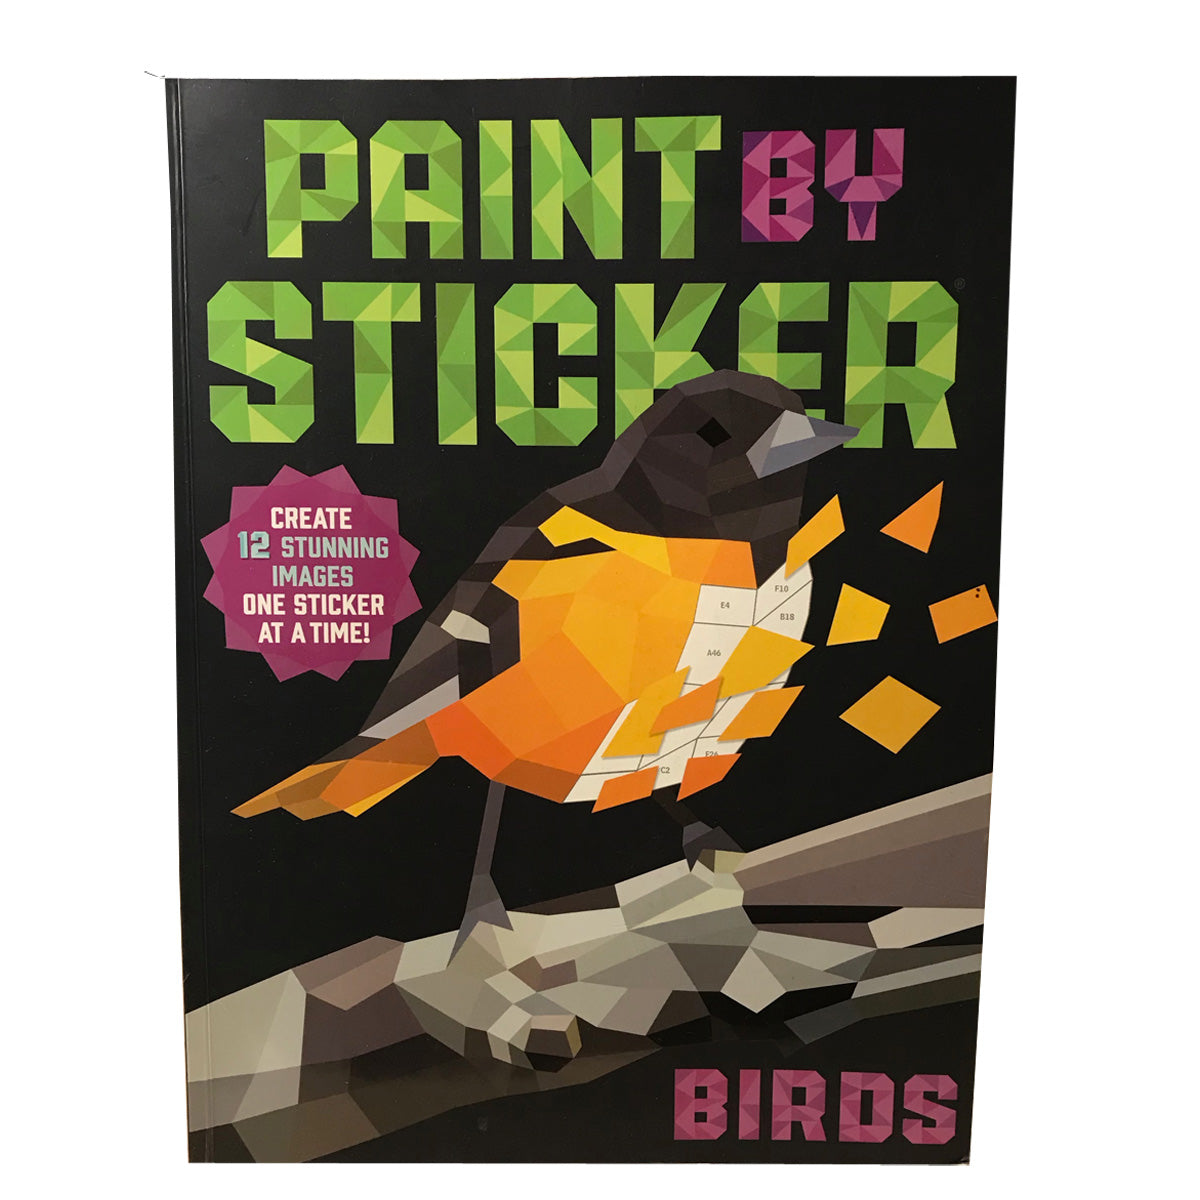 Paint by Sticker Book